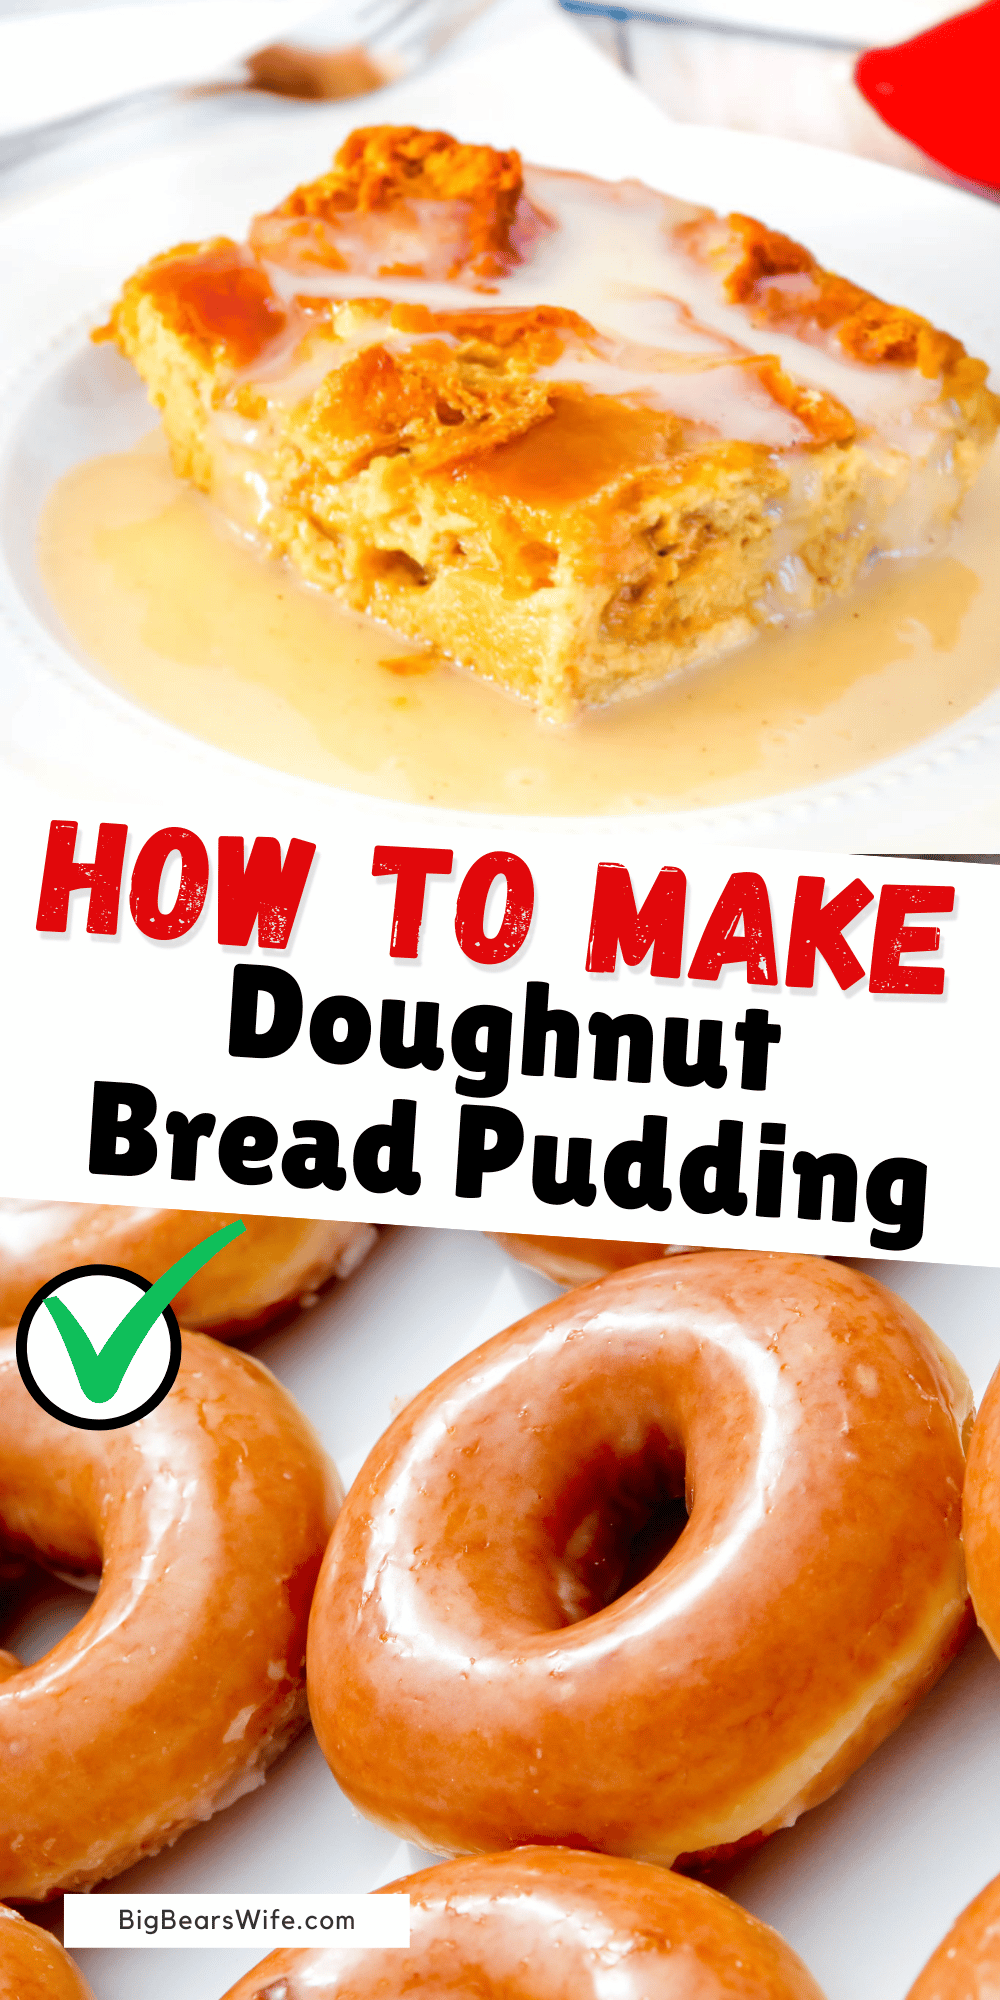 Kick your traditional bread pudding up a notch with the addition of glazed doughnuts! Doughnut Bread Pudding replaces french bread with glazed doughnuts for an over-the-top treat. Best of all, the doughnuts do not have to be fresh. Stale doughnuts work just as well as those right out of the box.  via @bigbearswife